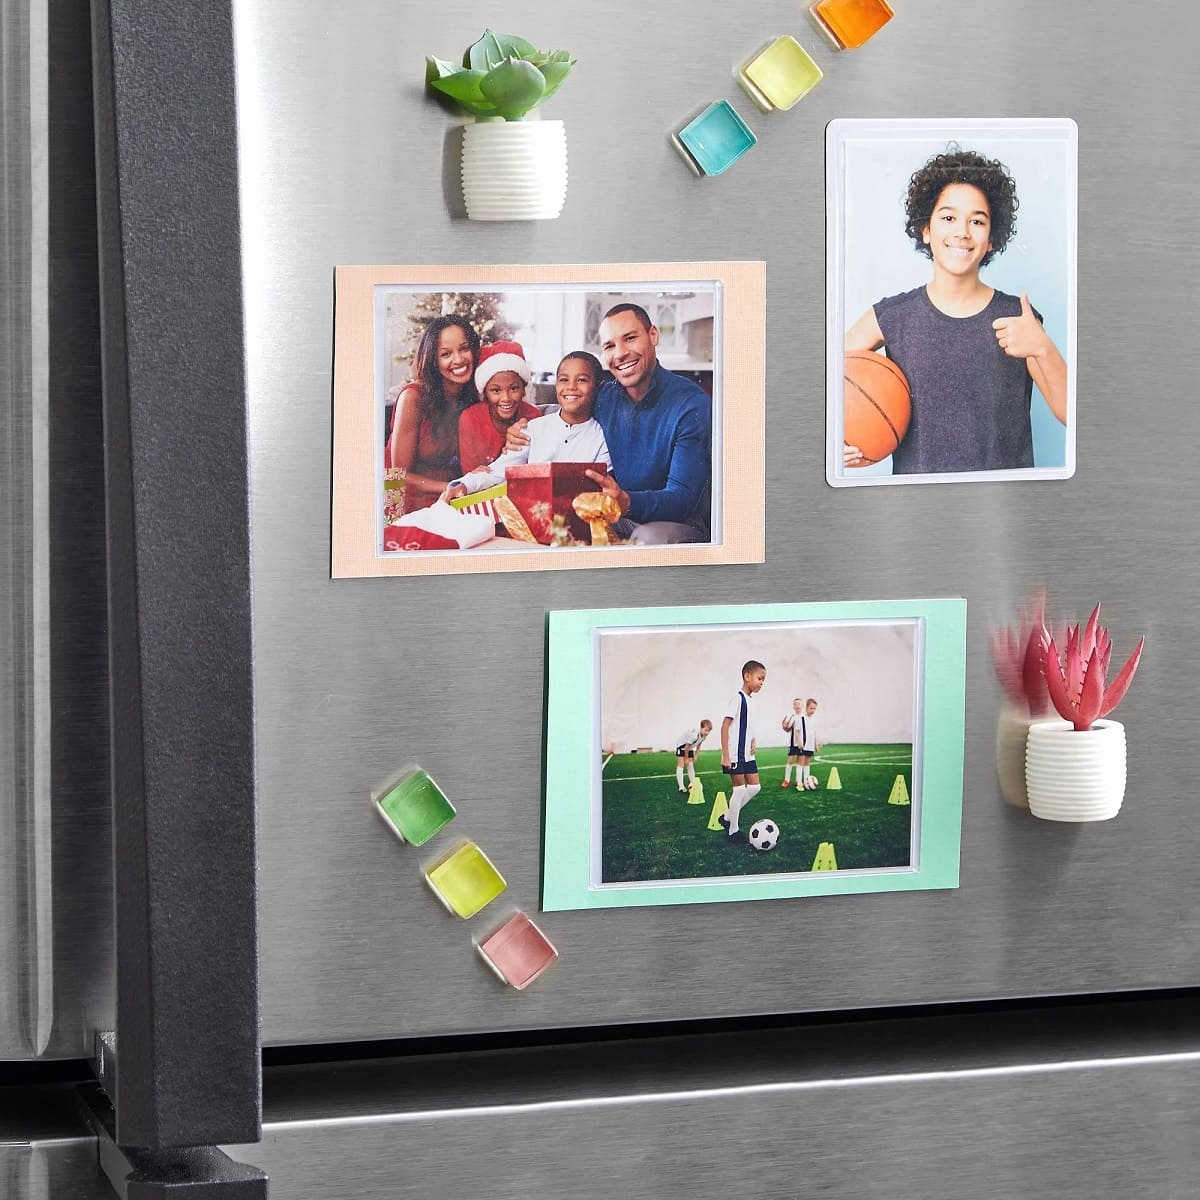 Magtech Magnetic Photo Pockets